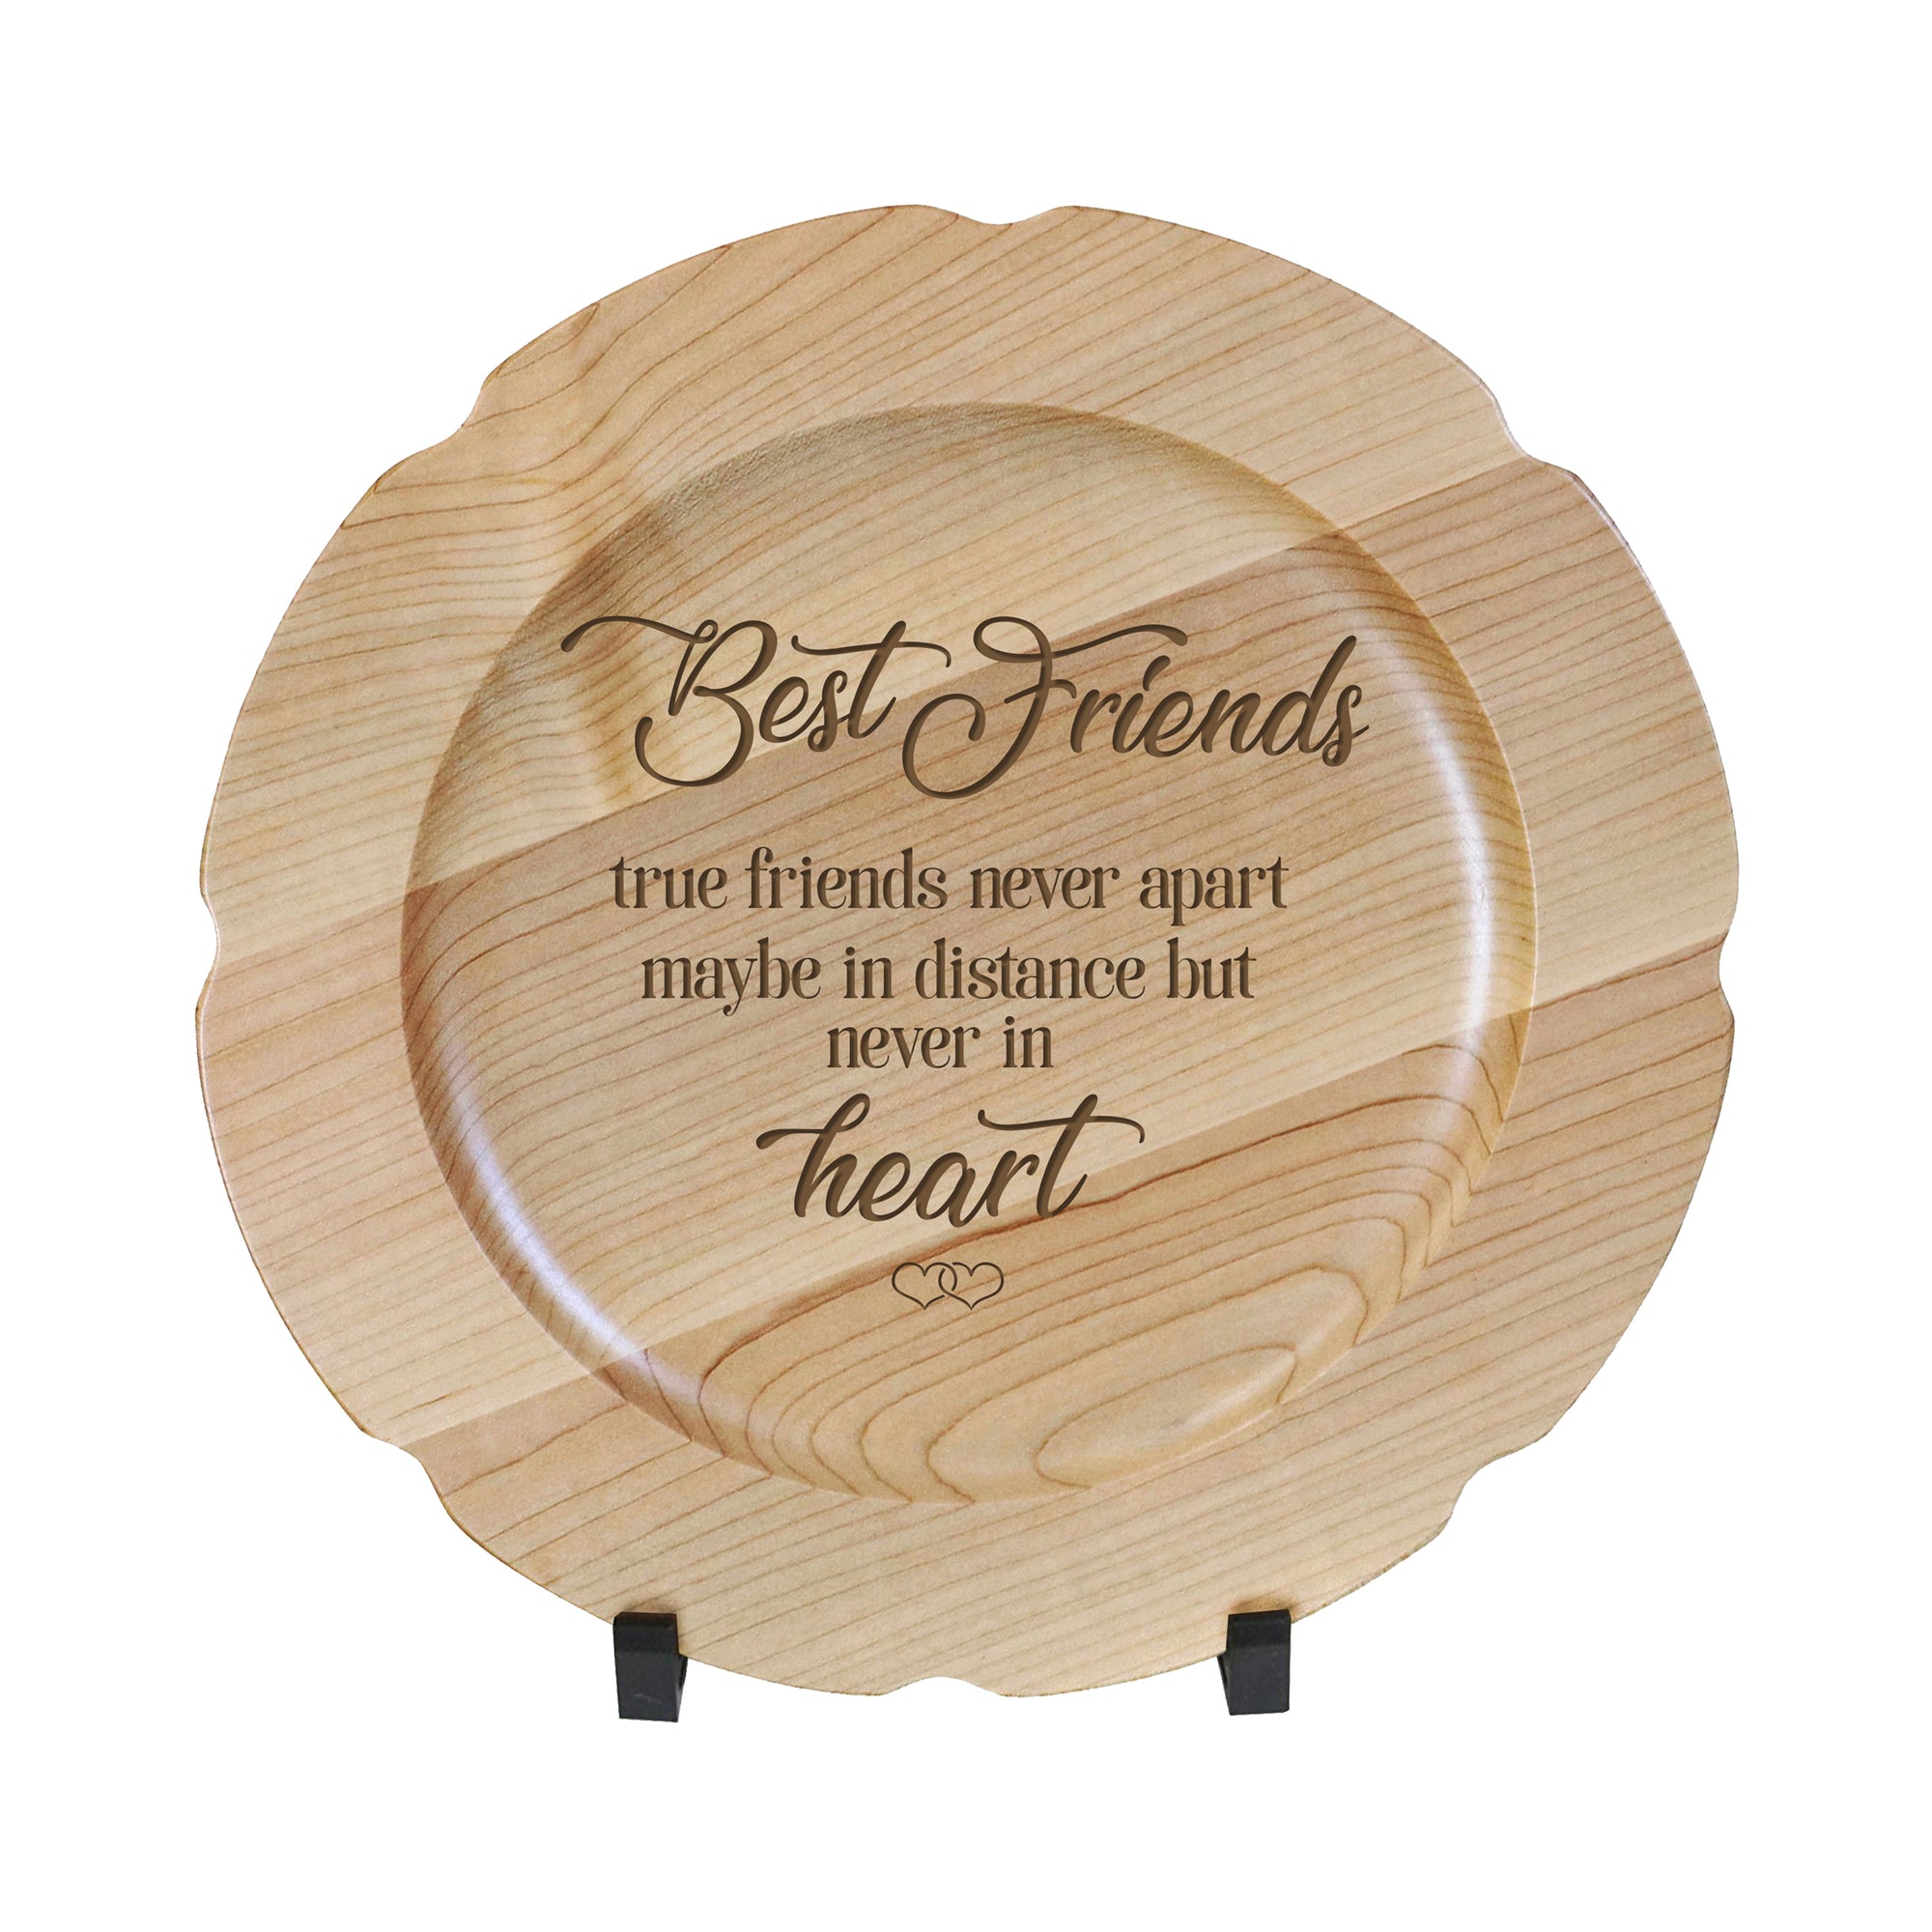 LifeSong Milestones Wooden Decorative Plate Family Keepsake 12in Best Friends Housewarming Mother’s Day Gift Home Wall Decor Kitchen Keepsake